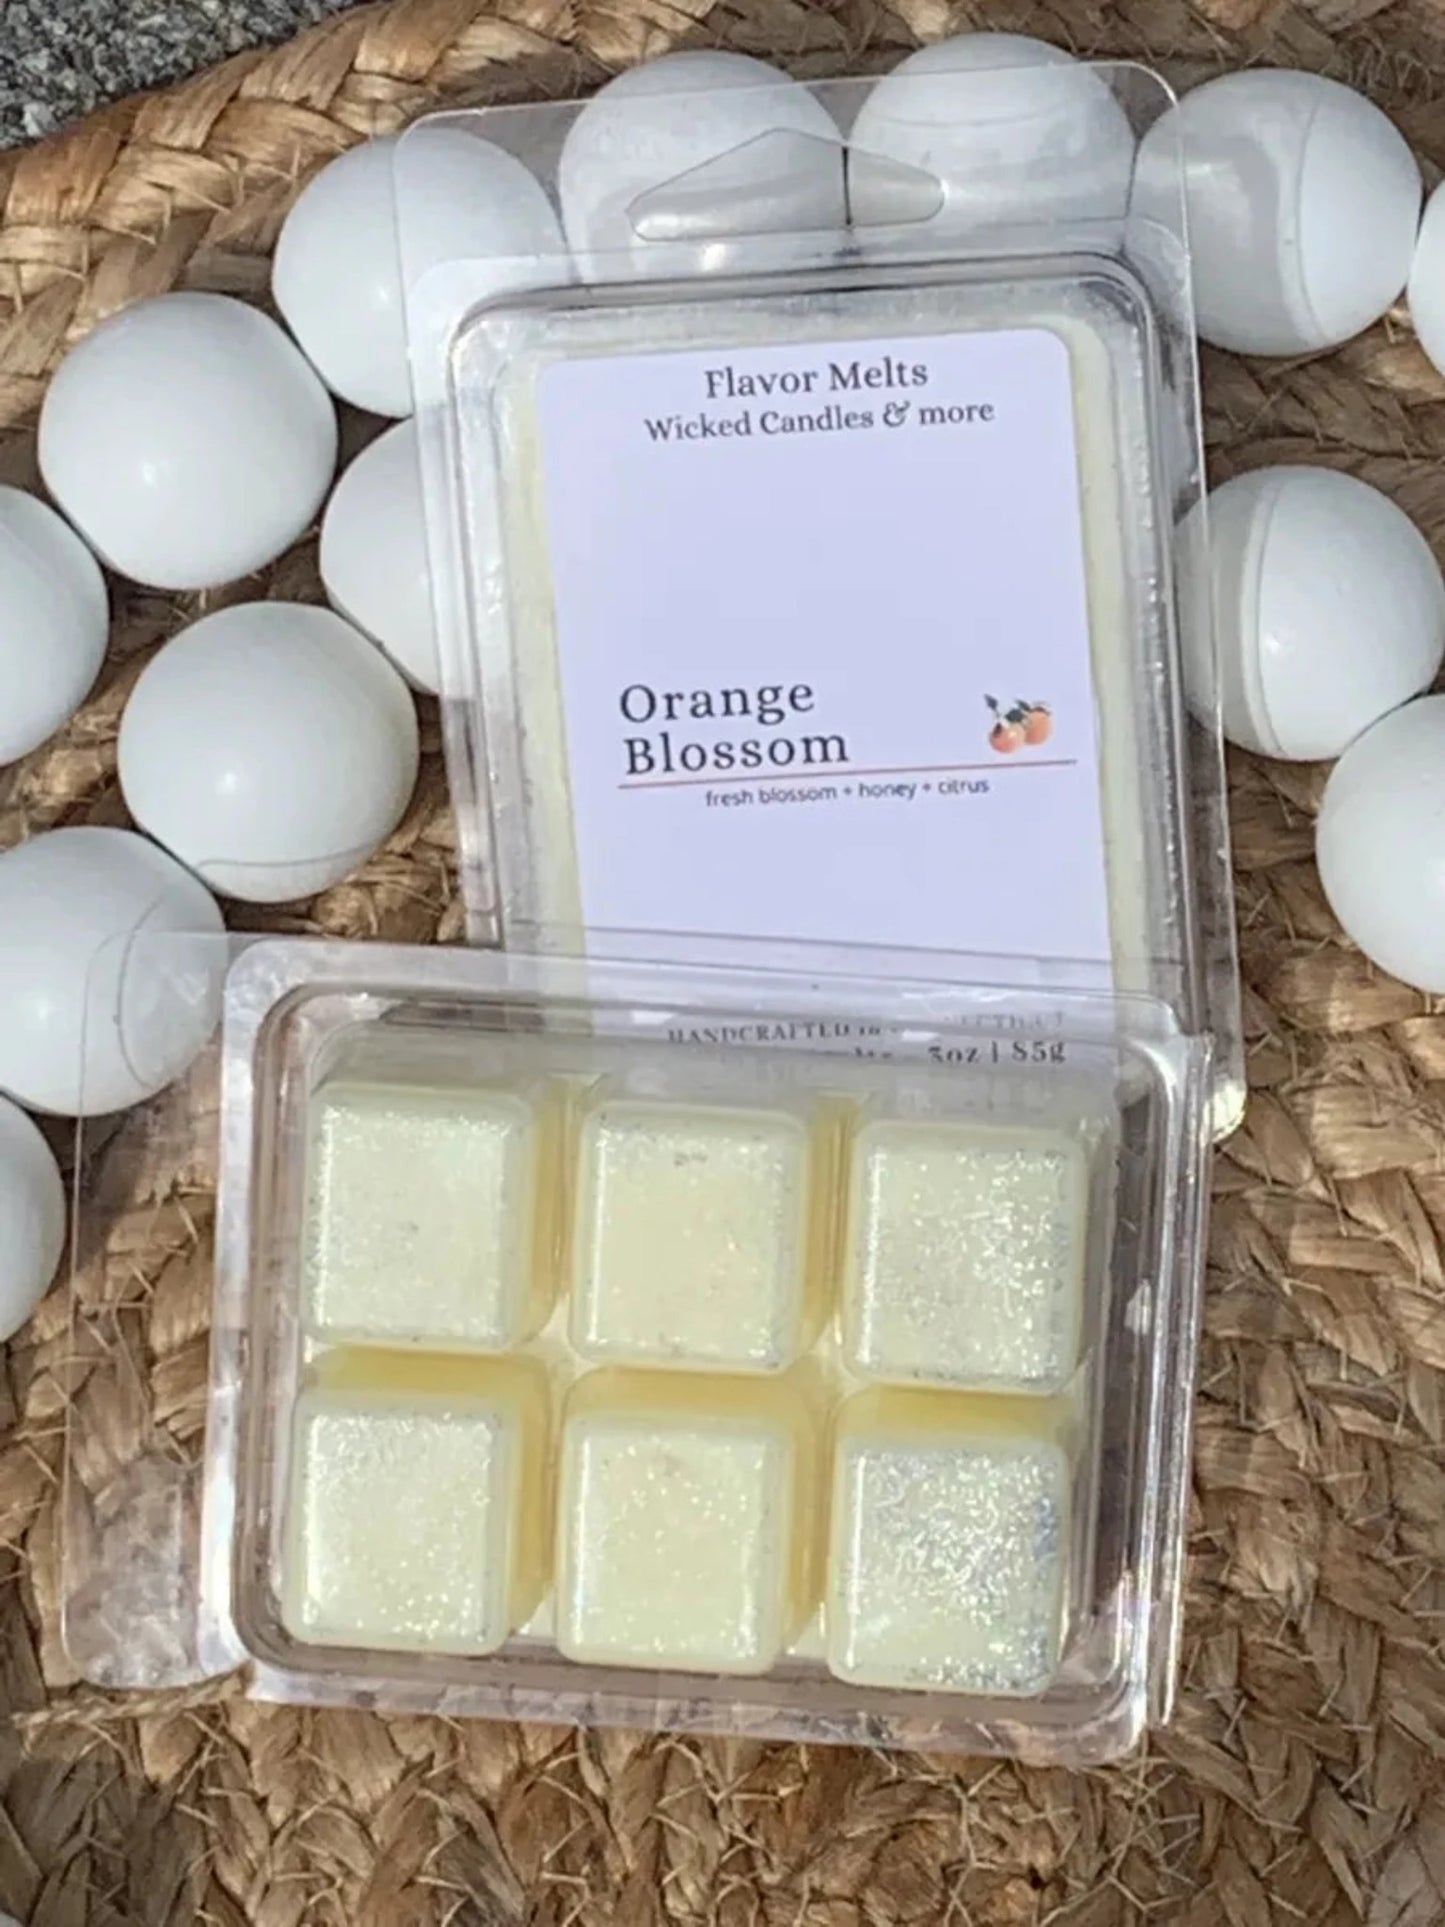 orange blossom soy wax melt scented with blossom, honey and citrus